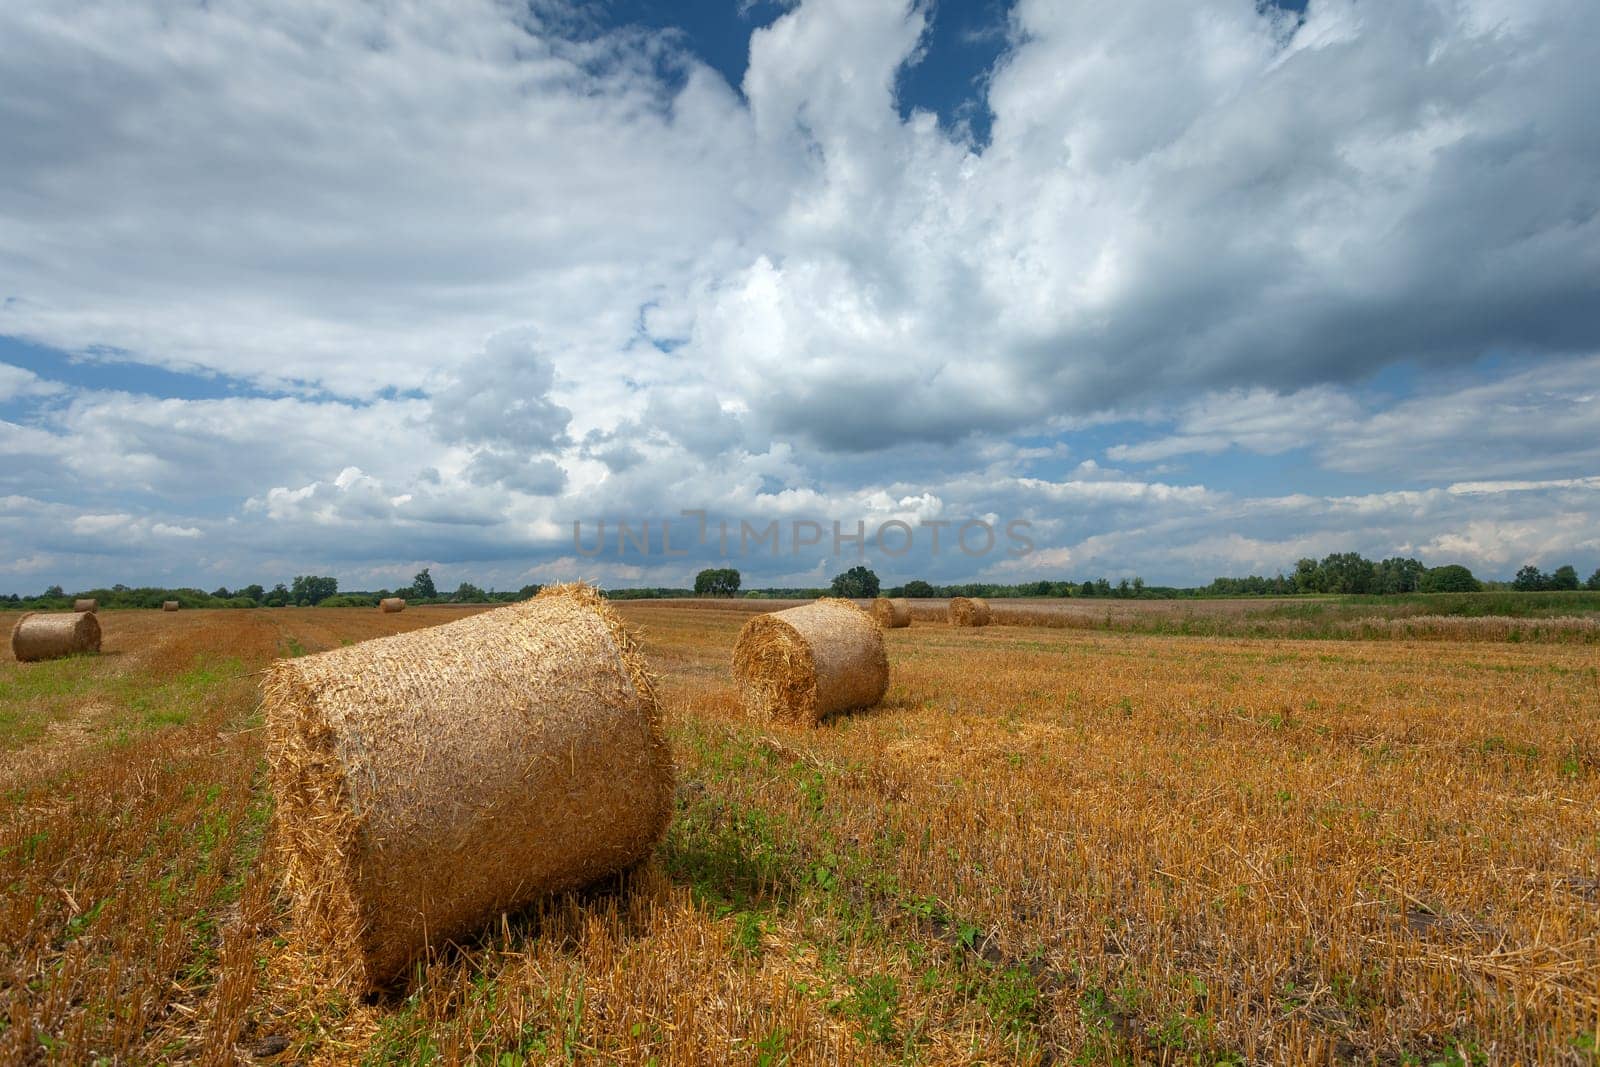 Hay bales in the field and clouds on the sky, summer view by darekb22